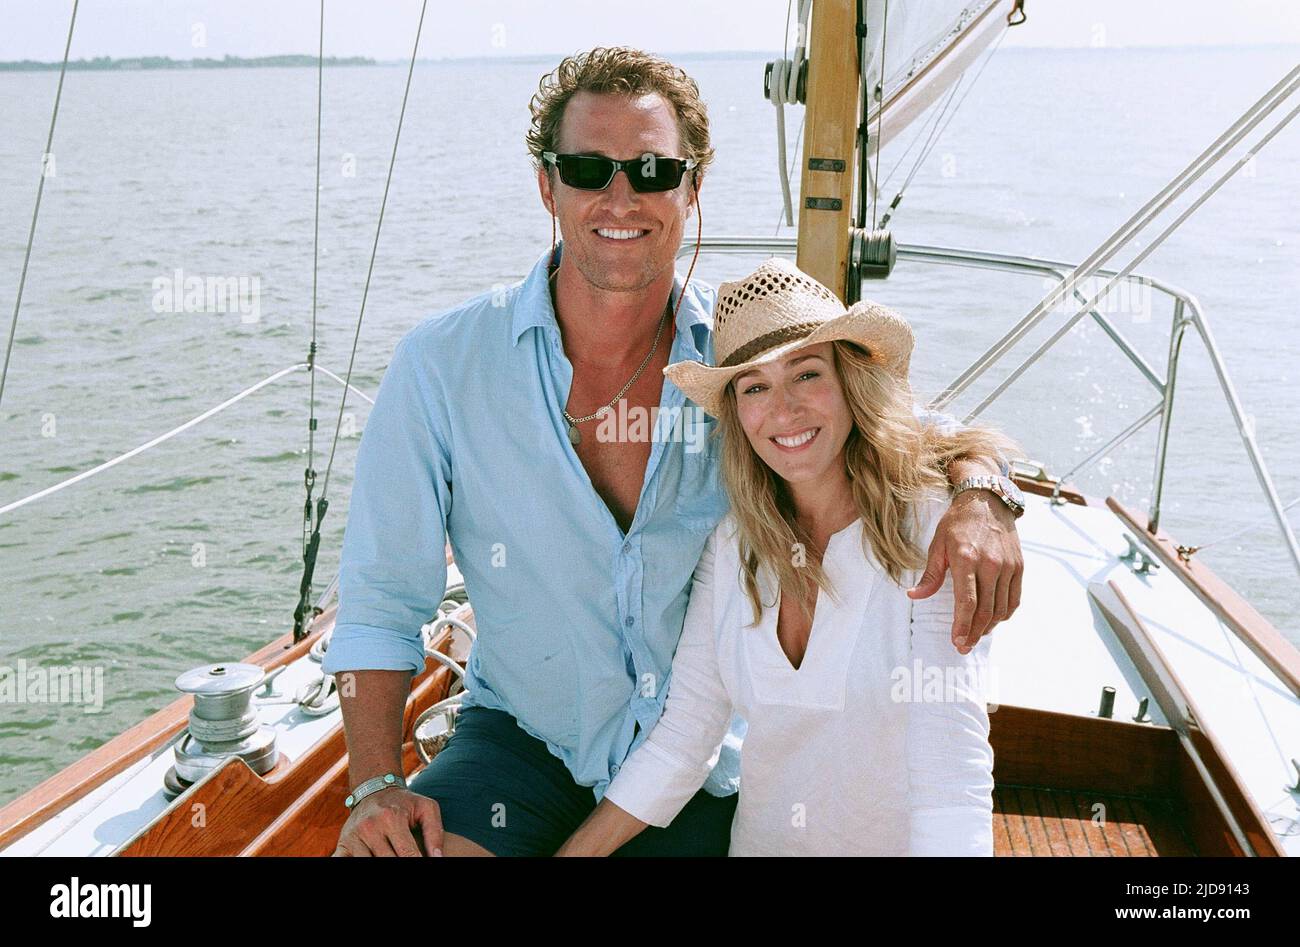 MCCONAUGHEY,PARKER, FAILURE TO LAUNCH, 2006, Stock Photo